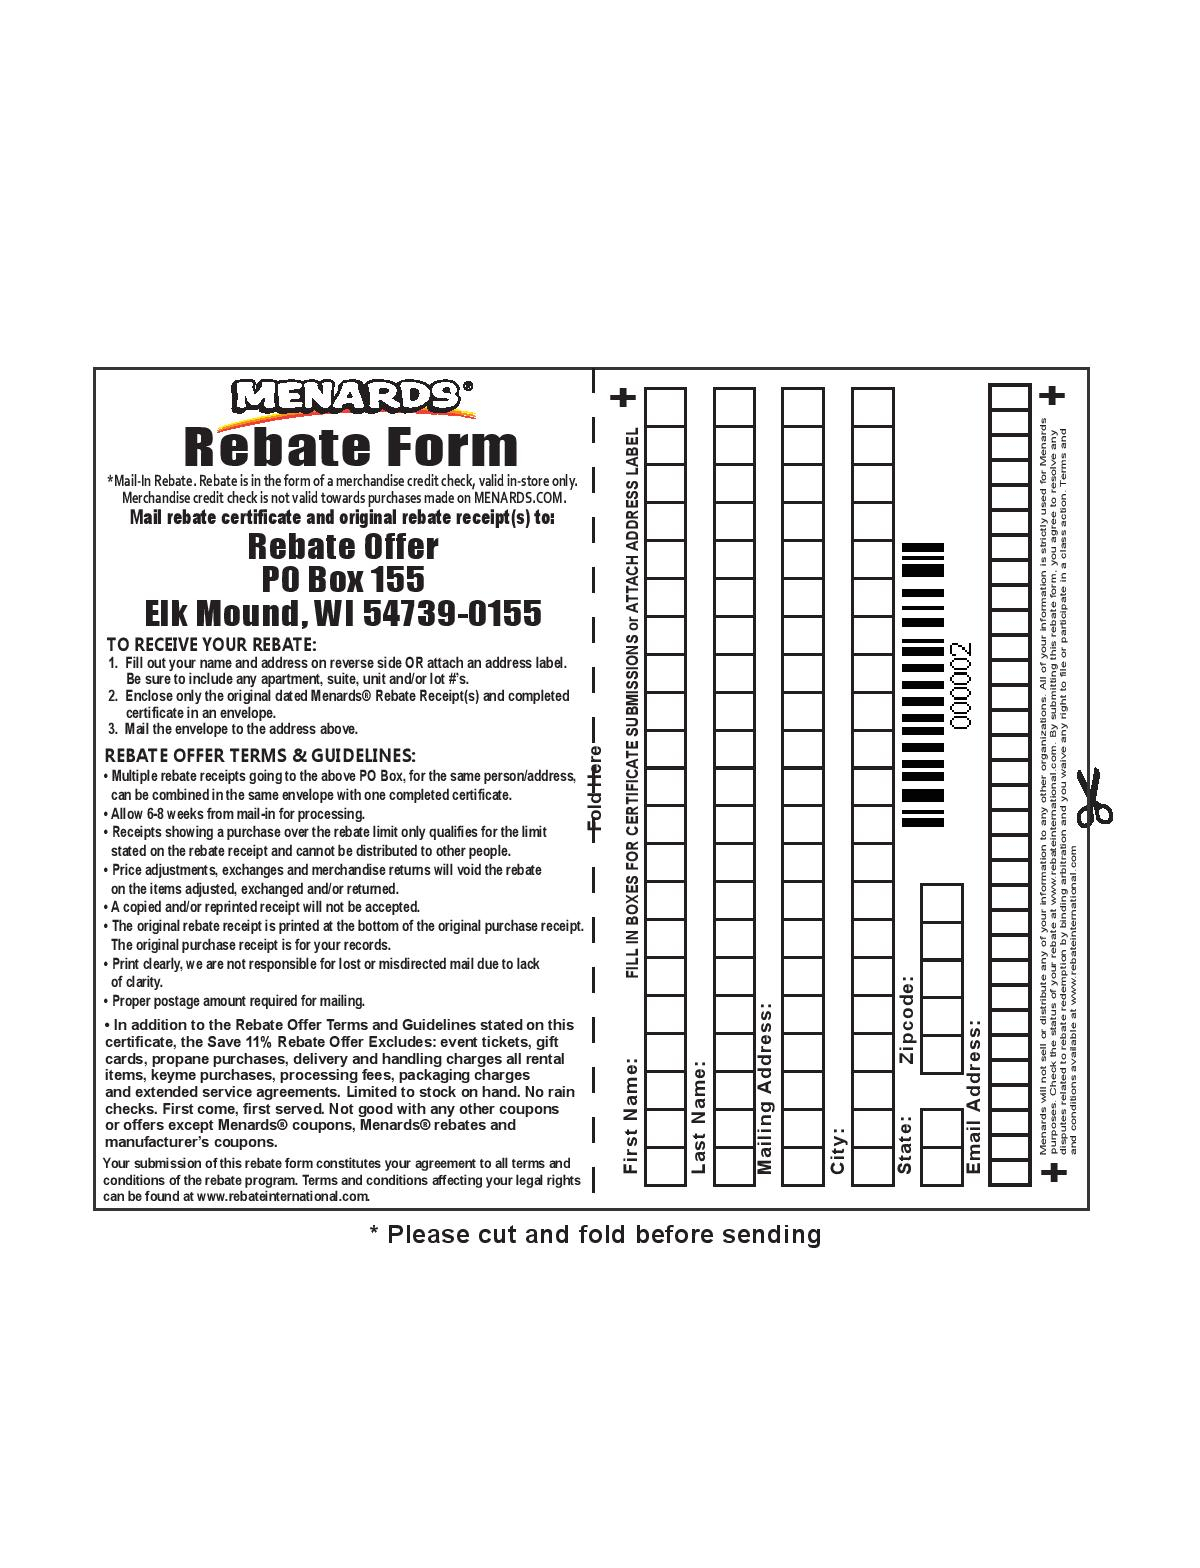 What To Do If Menards Rebate Is Lost